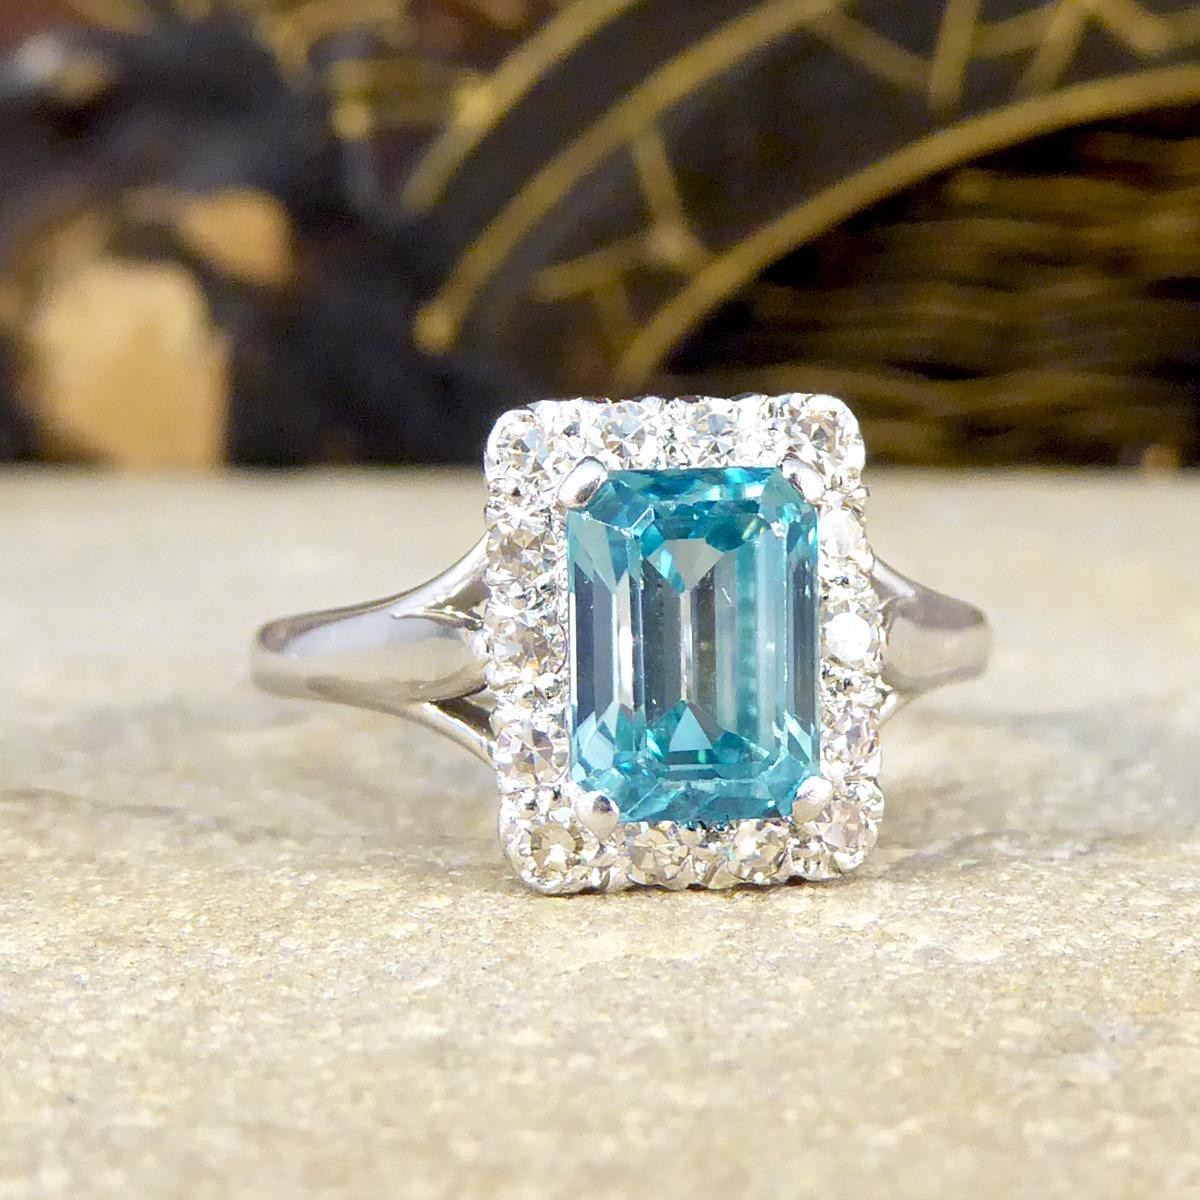 Featuring in this gorgeous vintage ring is an Emerald Cut Blue Zircon in the centre showing a bright and beautiful blue colour in a four claw setting allowing lots of light to pass through the stone and sparkle thoroughly. Surrounding the Zircon are